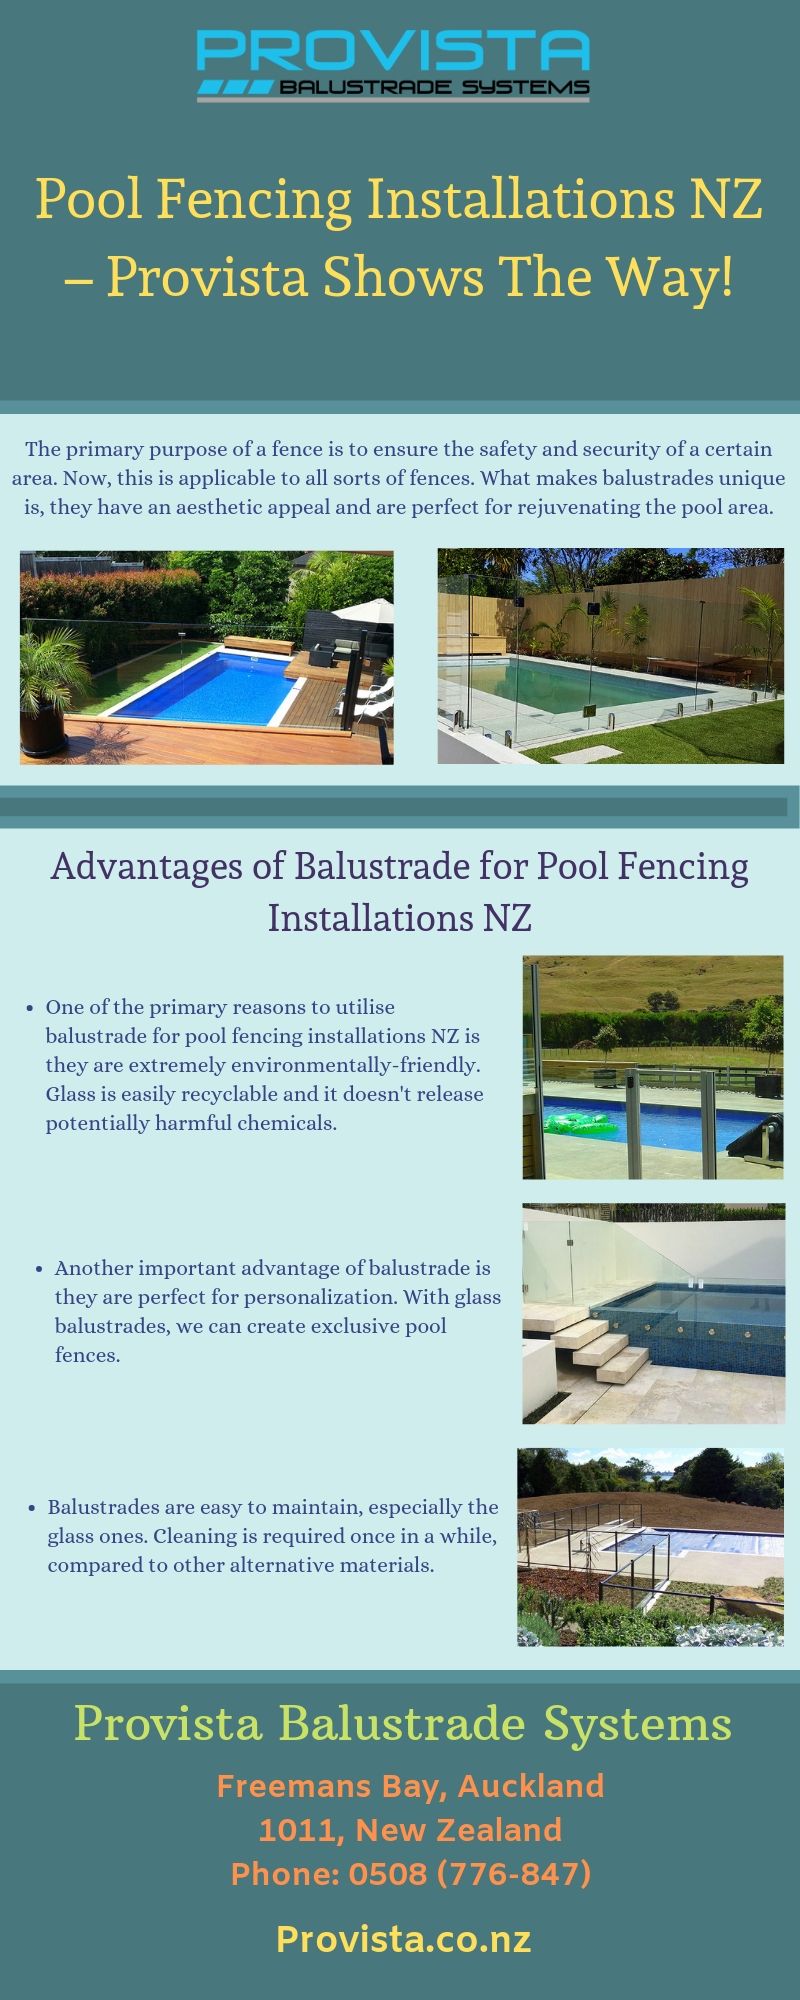 Pool Fencing Installations NZ – Provista Shows The Way! Balustrades are the currently the better investment for fencing compared to other materials like wood or iron fencing. Know how Provista can help you with that. For more details, visit this link: https://bit.ly/2DtjpUA by Provista